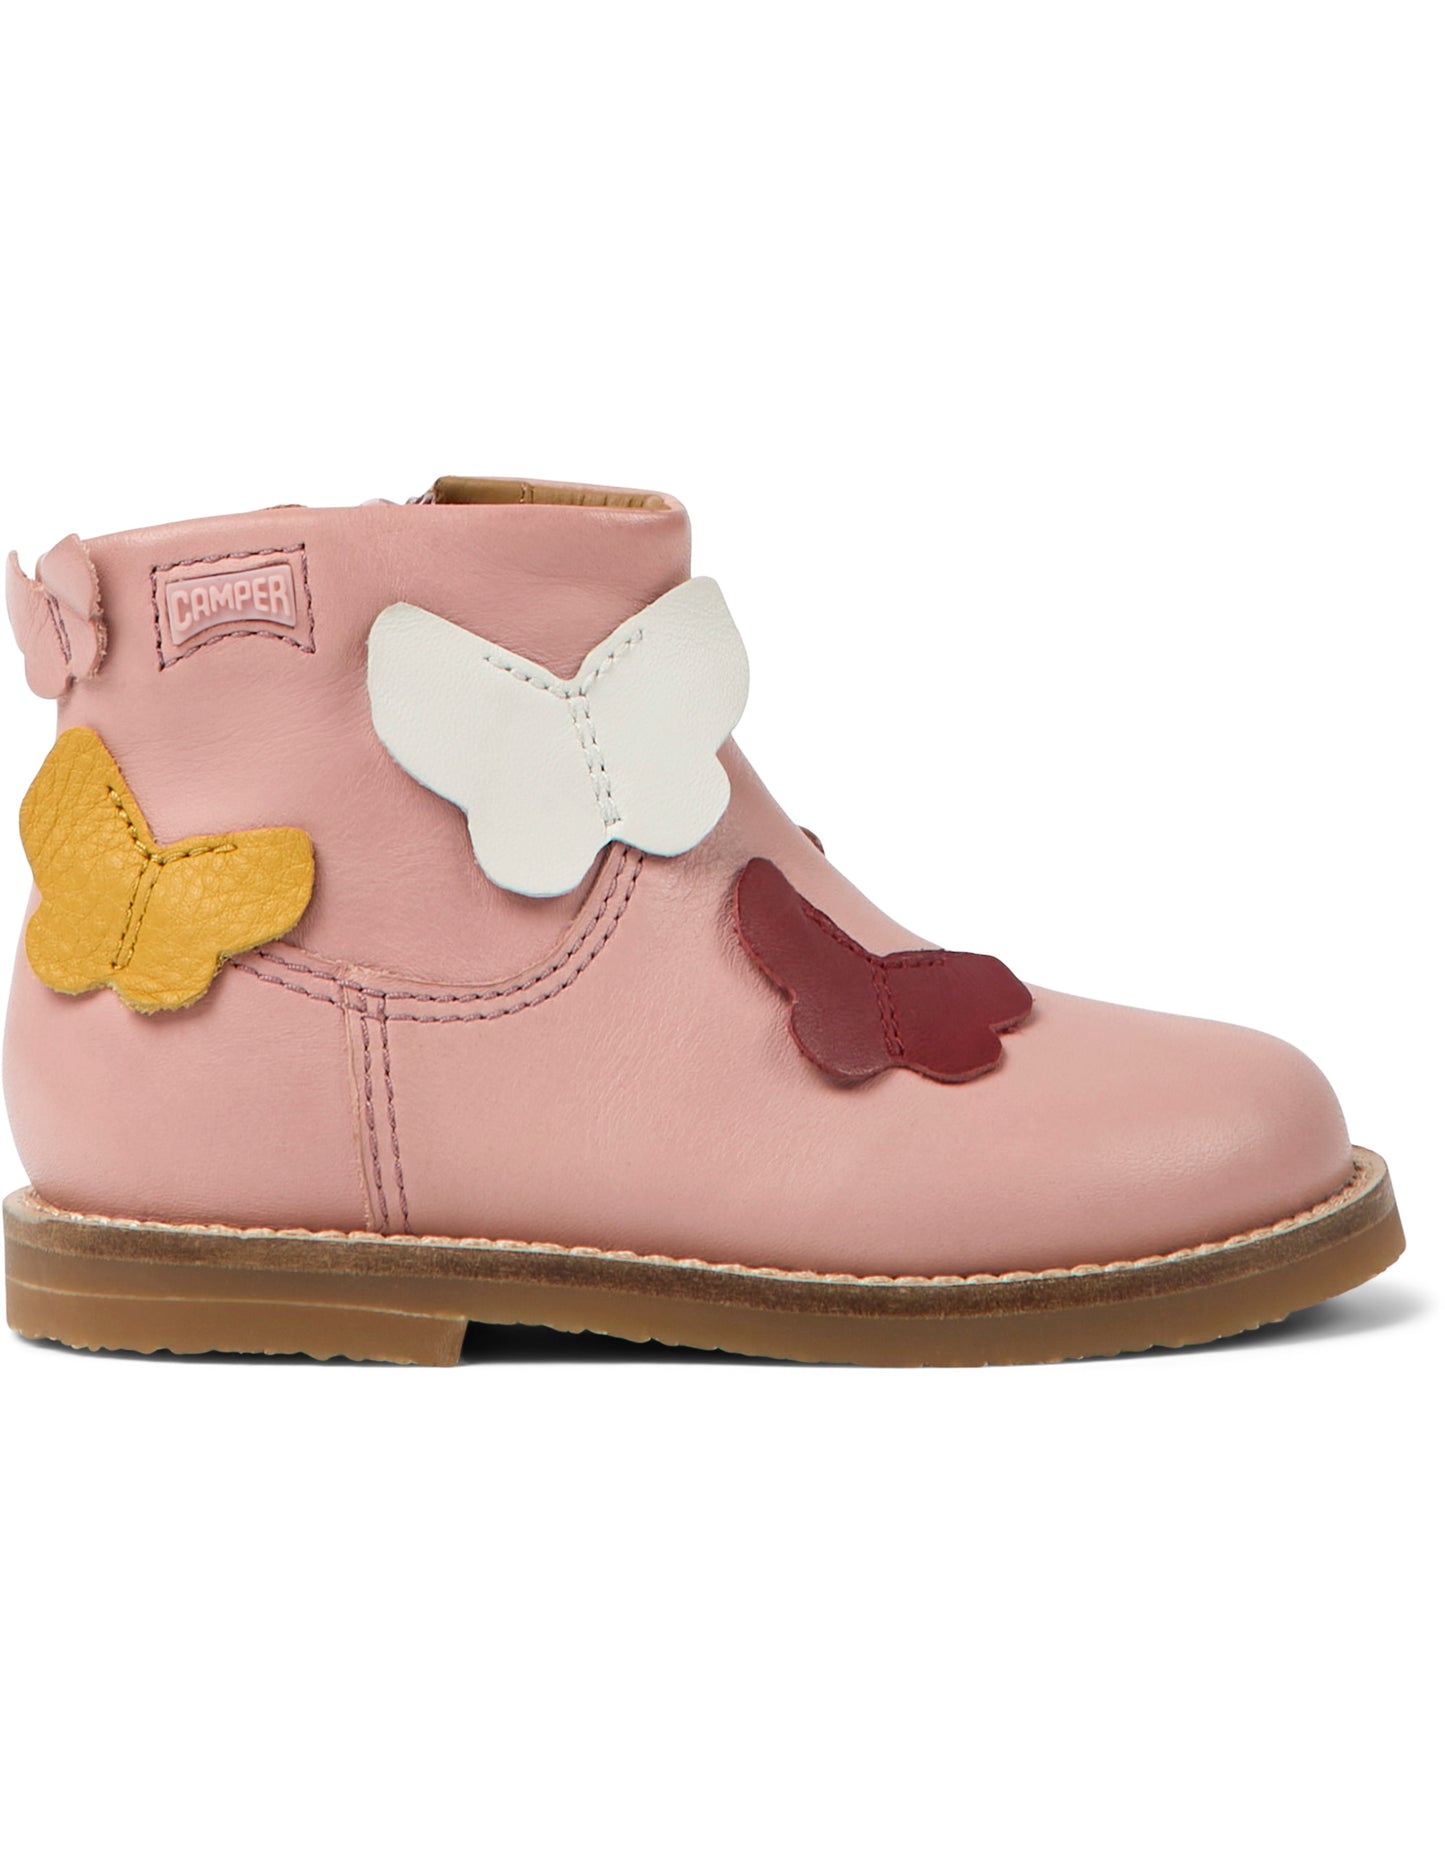 A girls butterfly detail ankle boot by Camper, style K900316-001, in pink with zip fastening. Right side view.